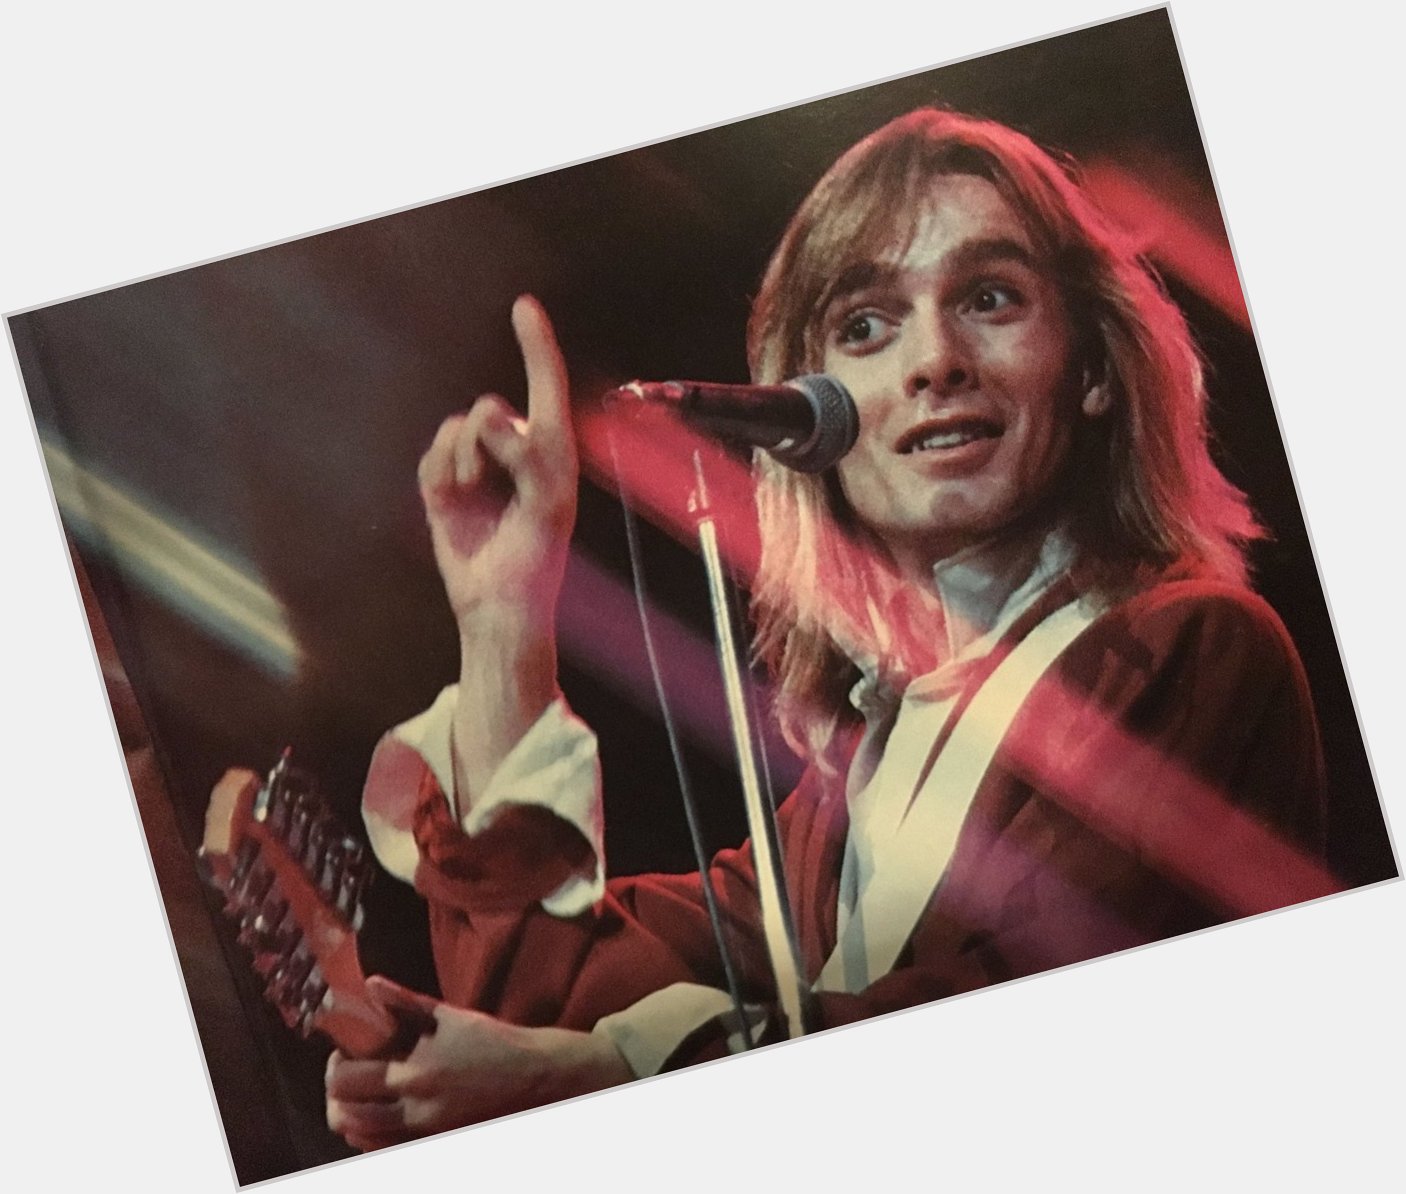 Happy 69th birthday to the great Cheap Trick frontman Robin Zander, who was born on this day in 1953. 